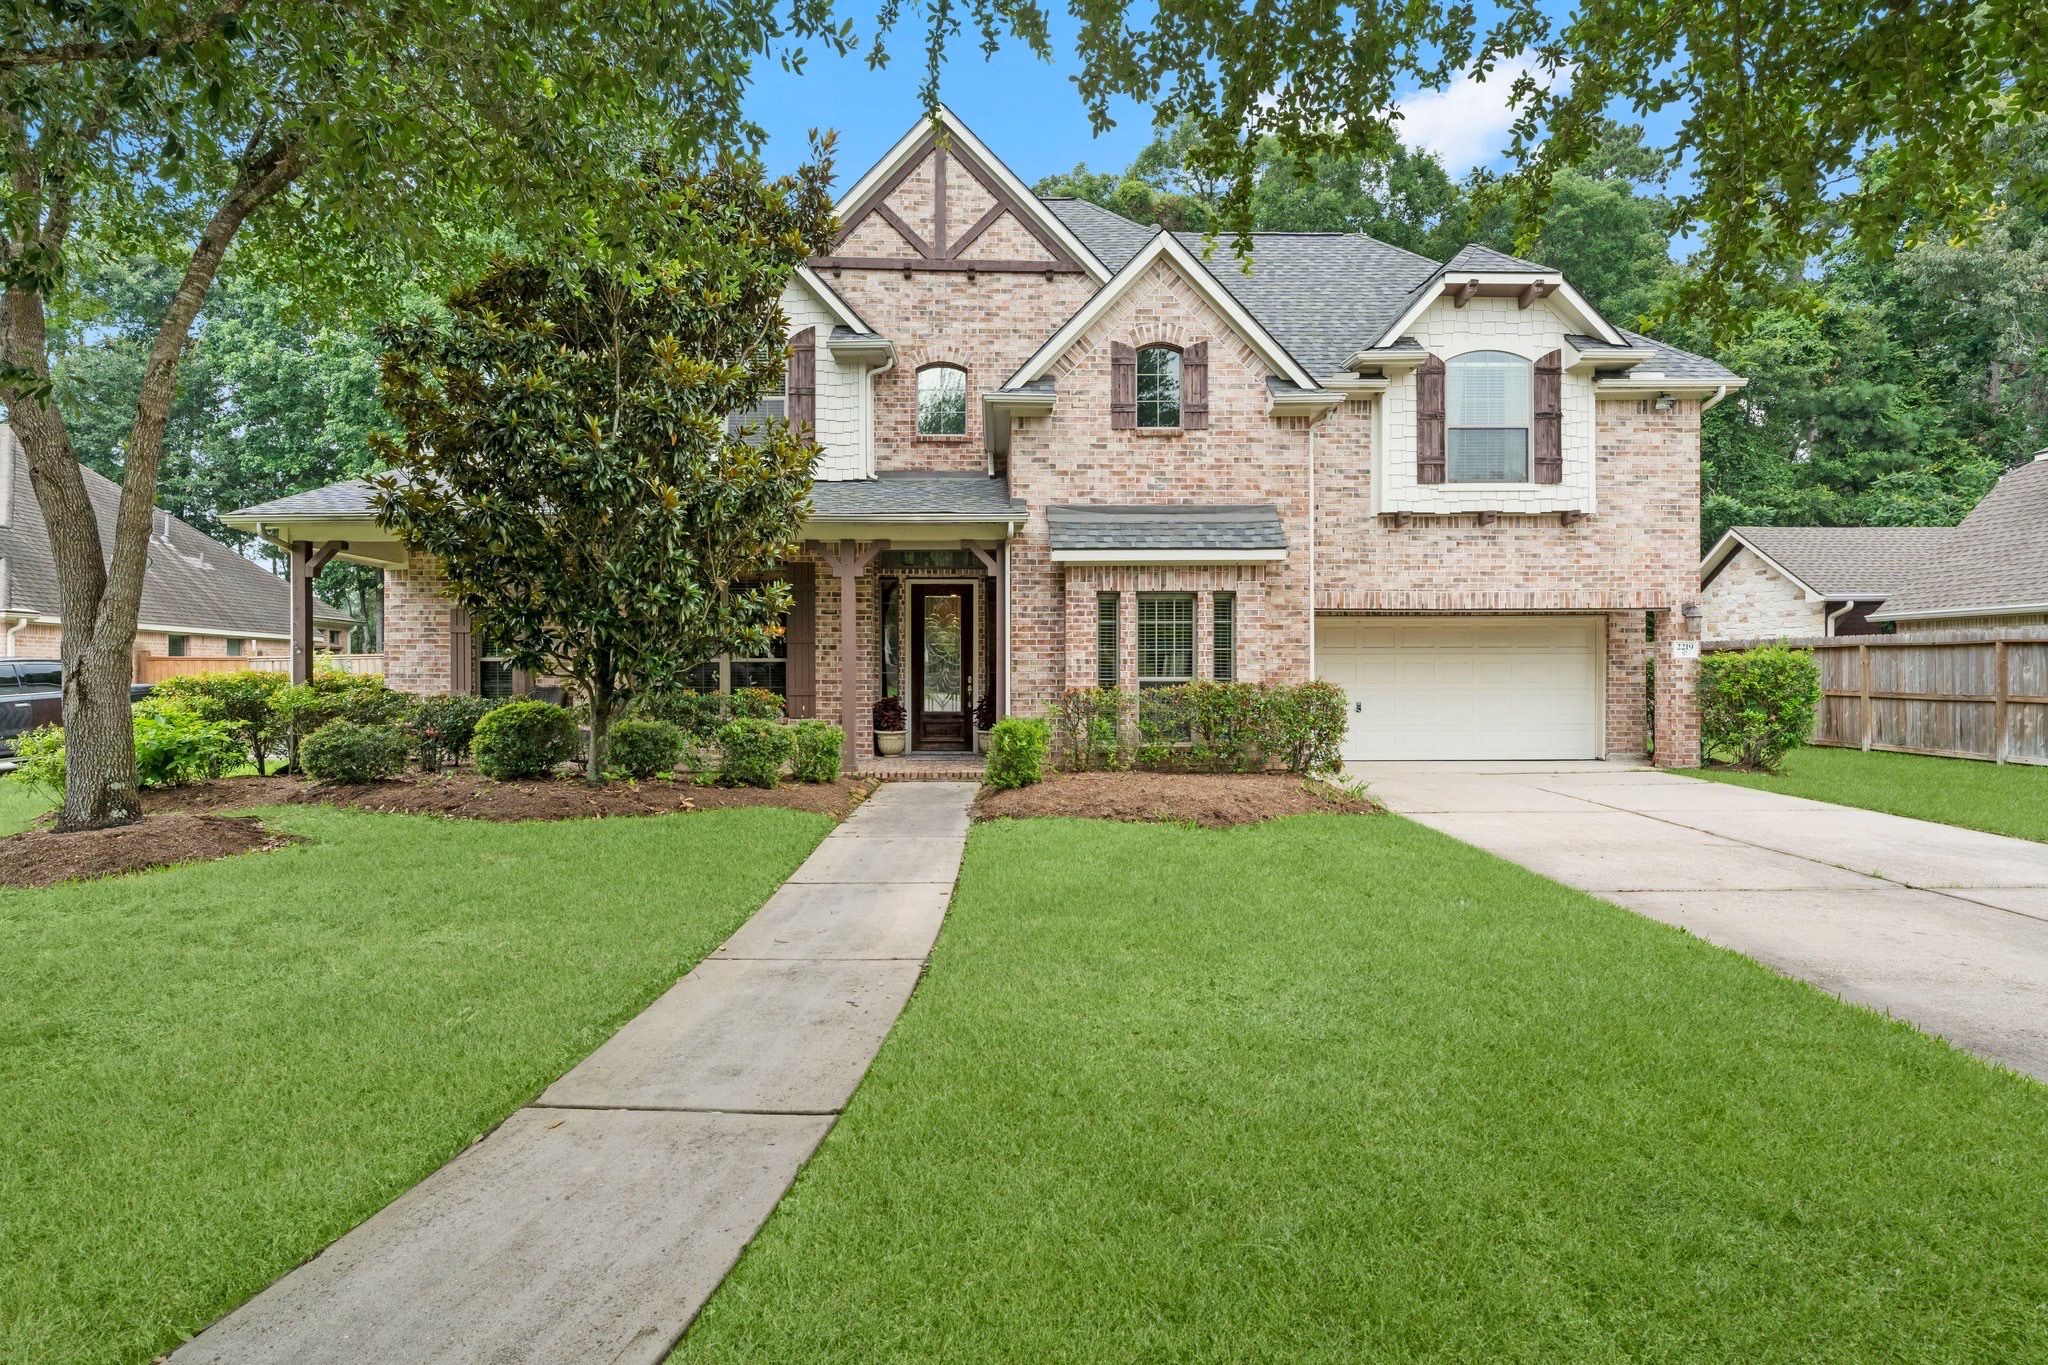 Welcome Home to this one of a kind home located in the gated section of The Enclave of Imperial Oaks.